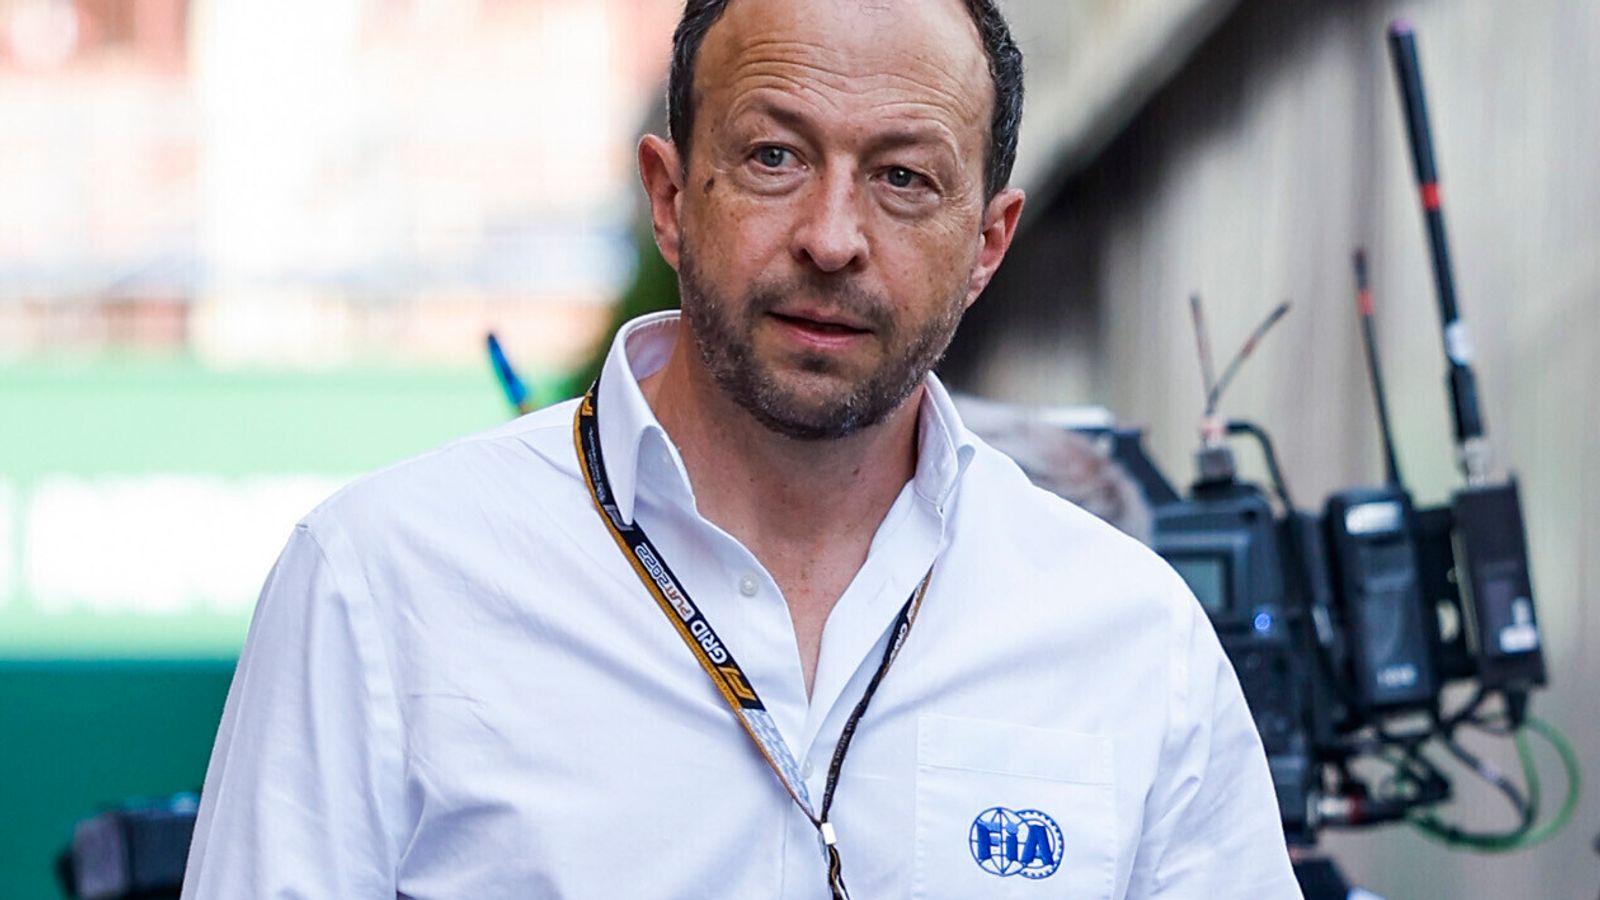 FIA confirm departure of F1 chief Peter Bayer and appoint former Mercedes advisor Shaila-Ann Rao